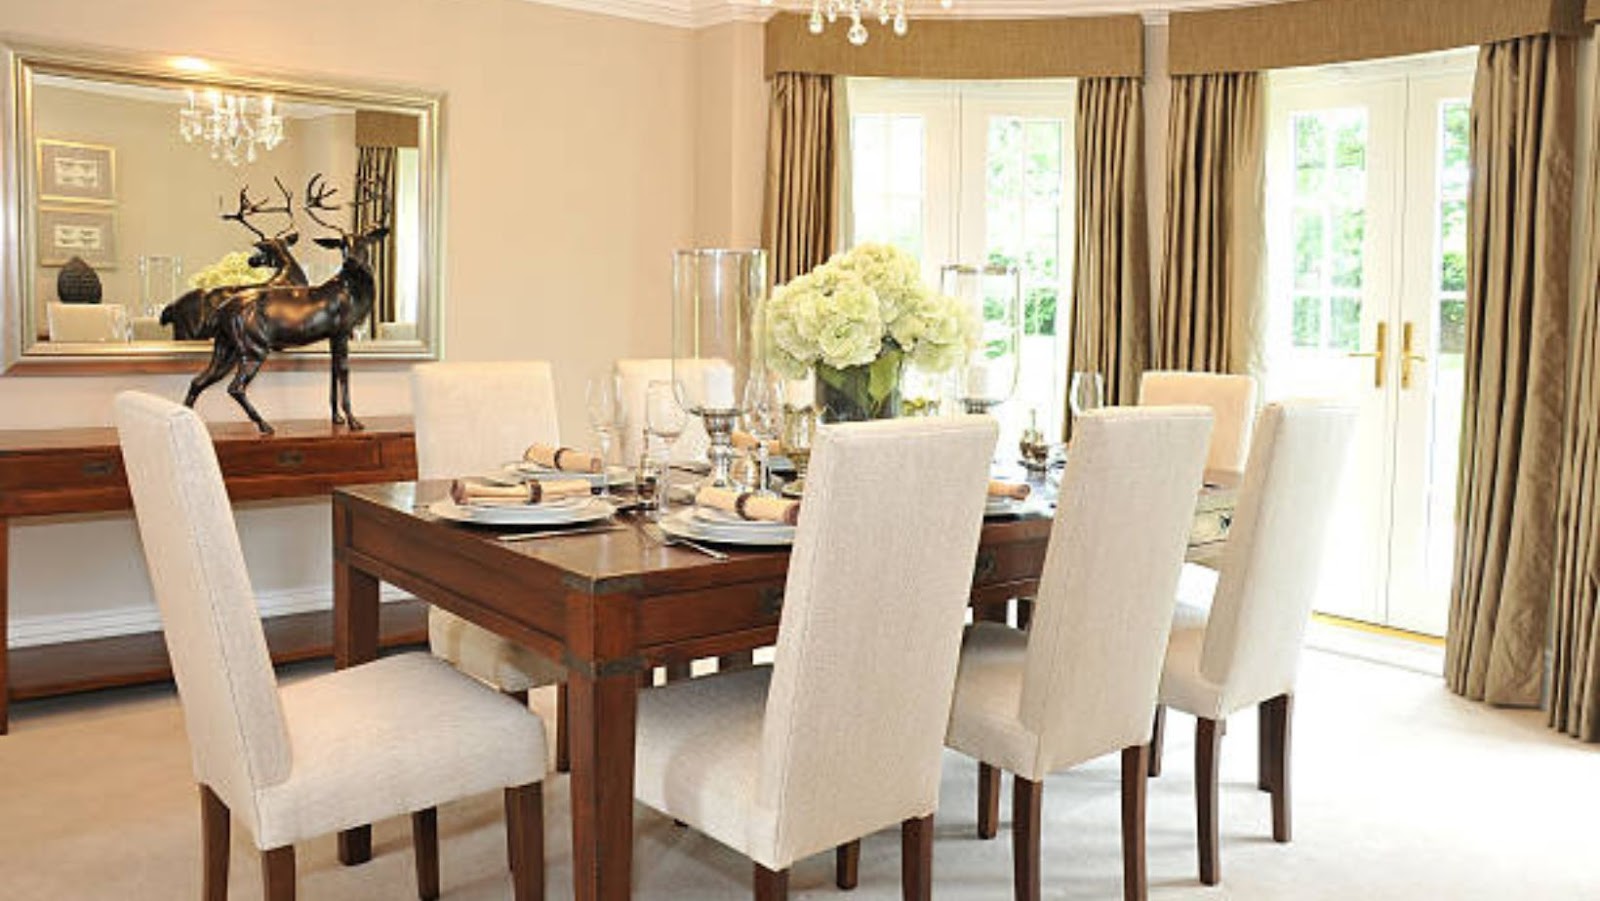 8 Secrets To Finding The Right Dining Chair For Your Home